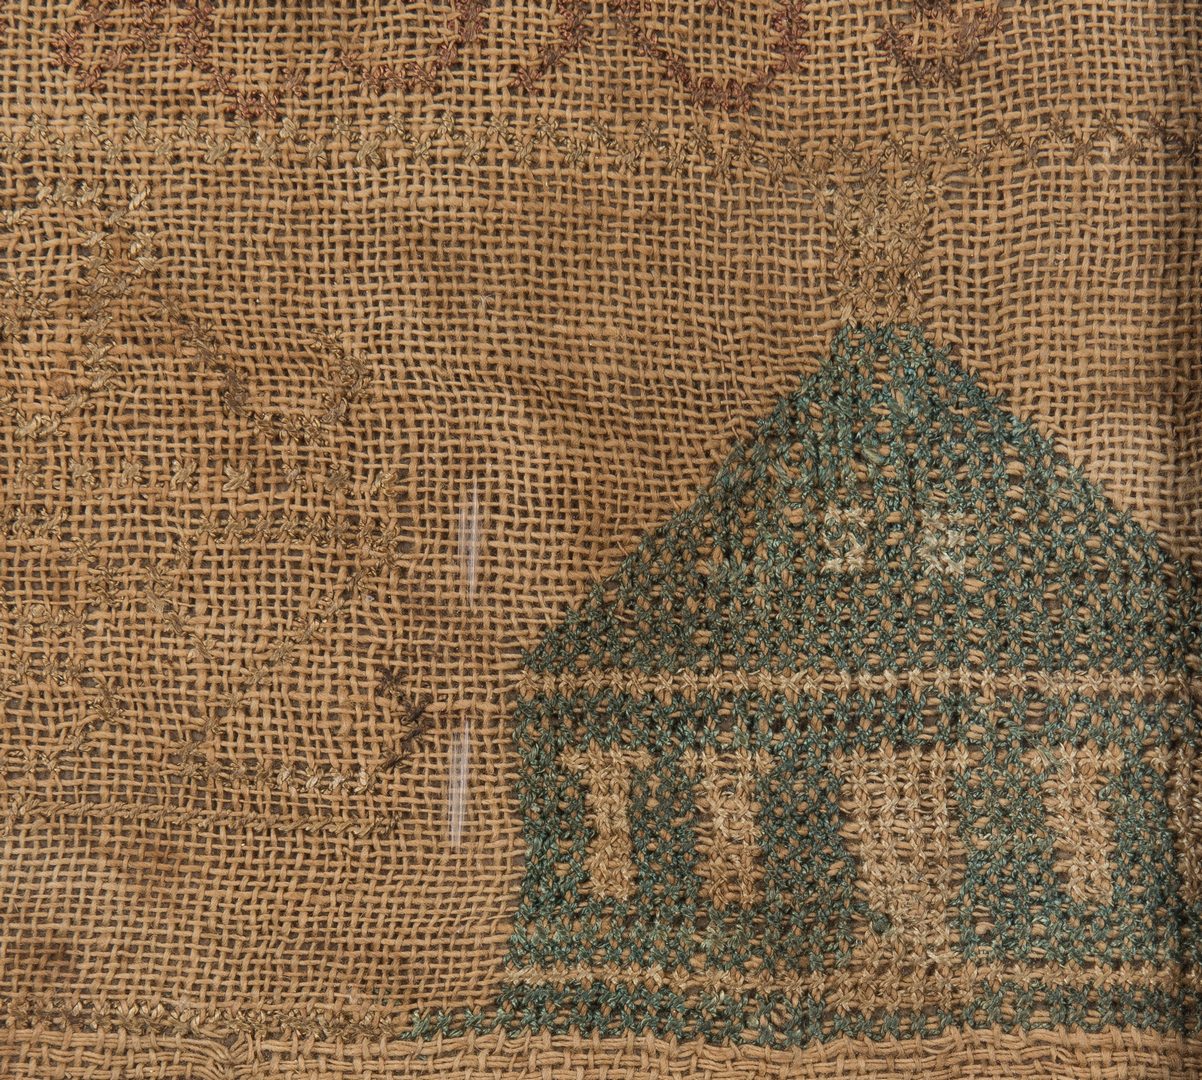 Lot 648: Kentucky House Sampler and Needlework Picture